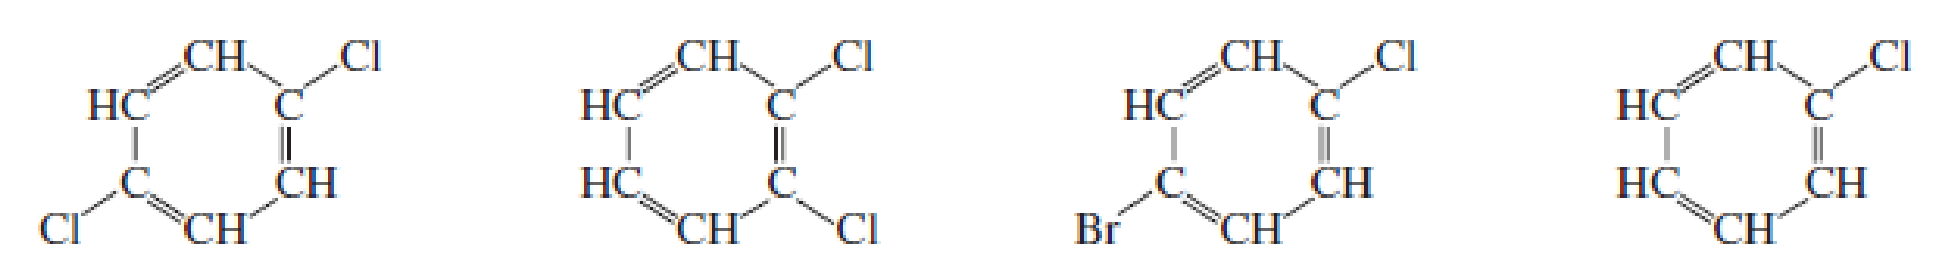 Chapter 1, Problem 55P, Rank the following compounds from highest dipole moment to lowest dipole moment: 